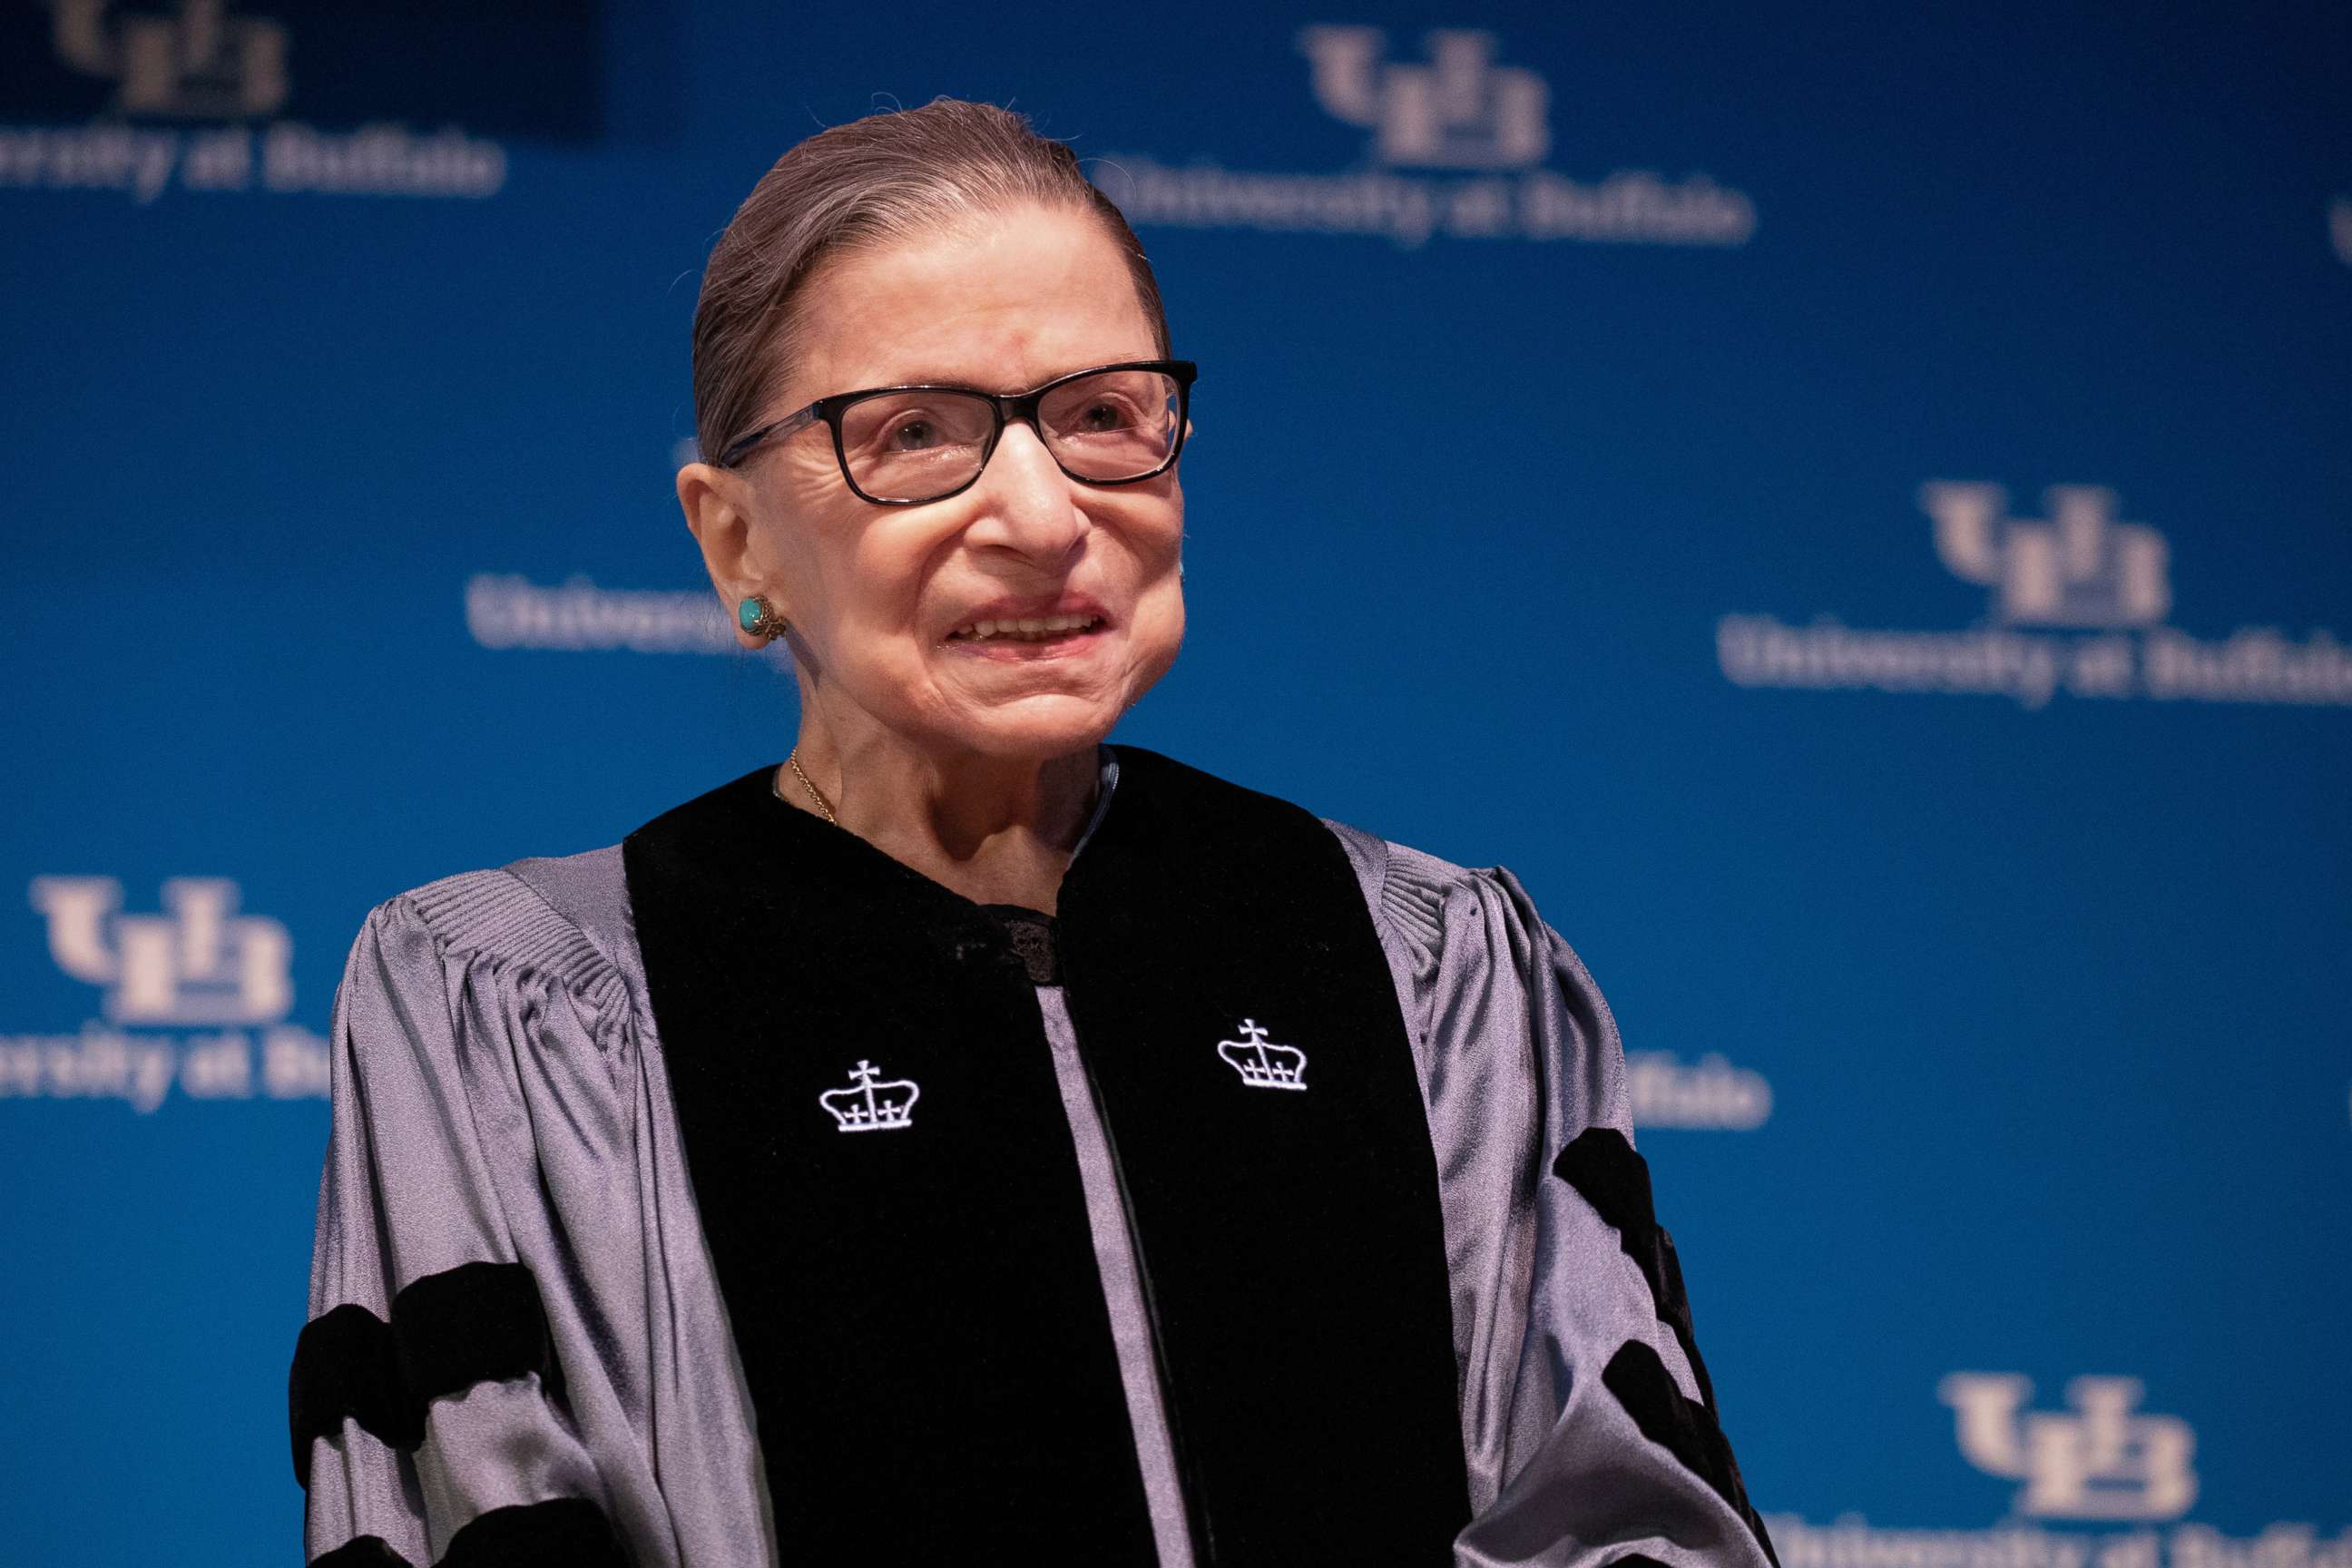 PHOTO: Supreme Court Justice Ruth Bader Ginsburg smiles during a reception where she was presented with an honorary doctoral degree at the University of Buffalo School of Law in Buffalo, New York, Aug. 26, 2019.